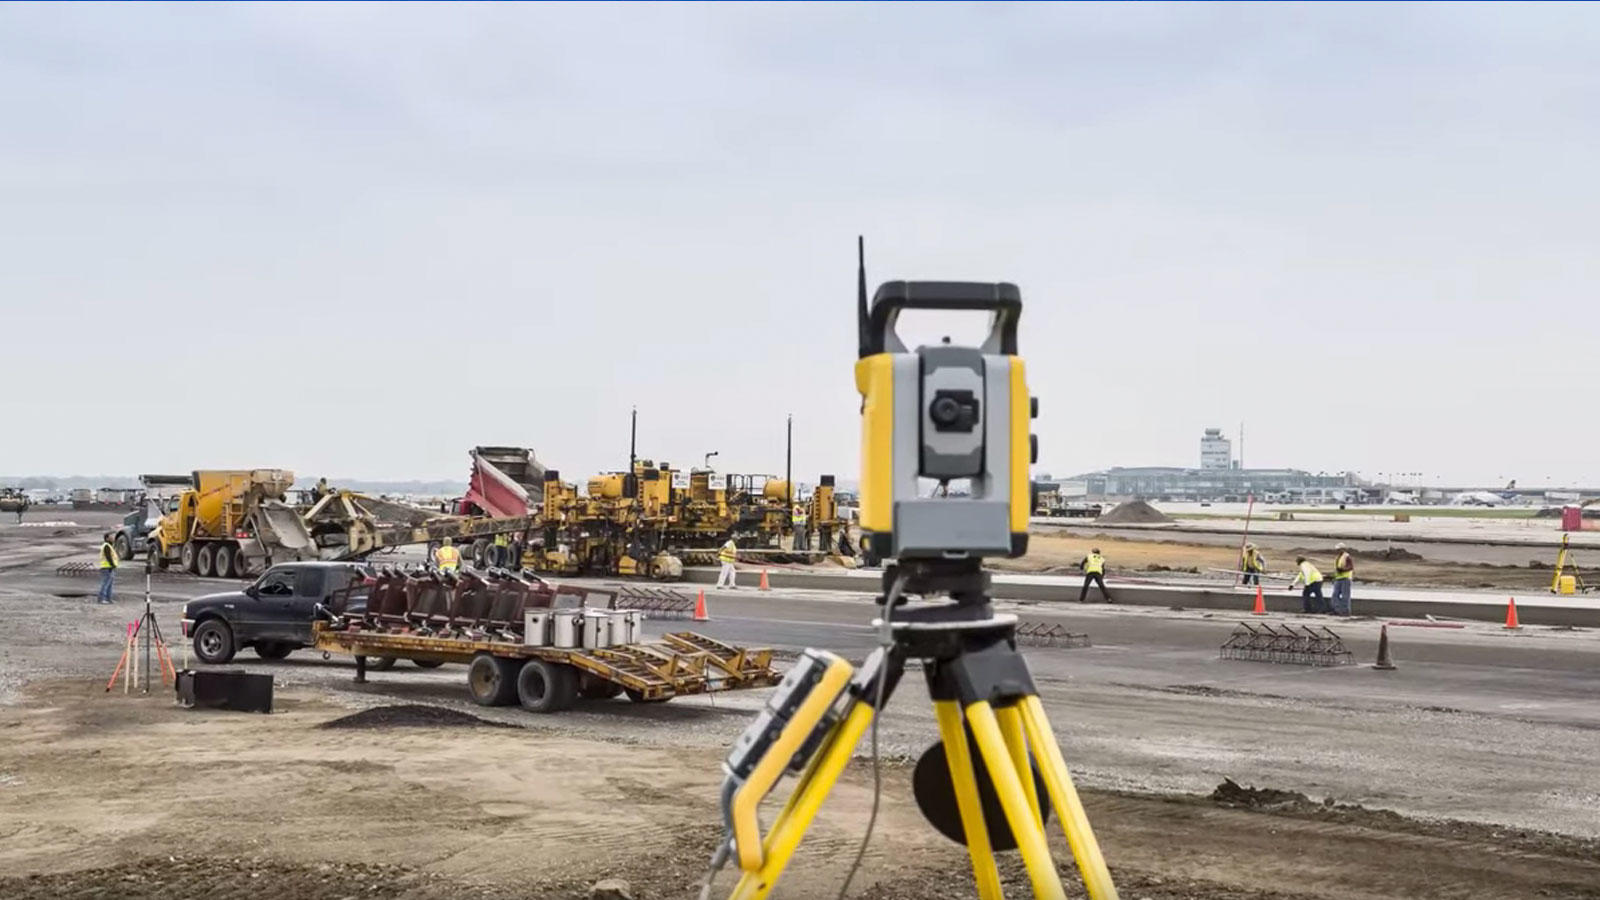 trimble total station and hot swap